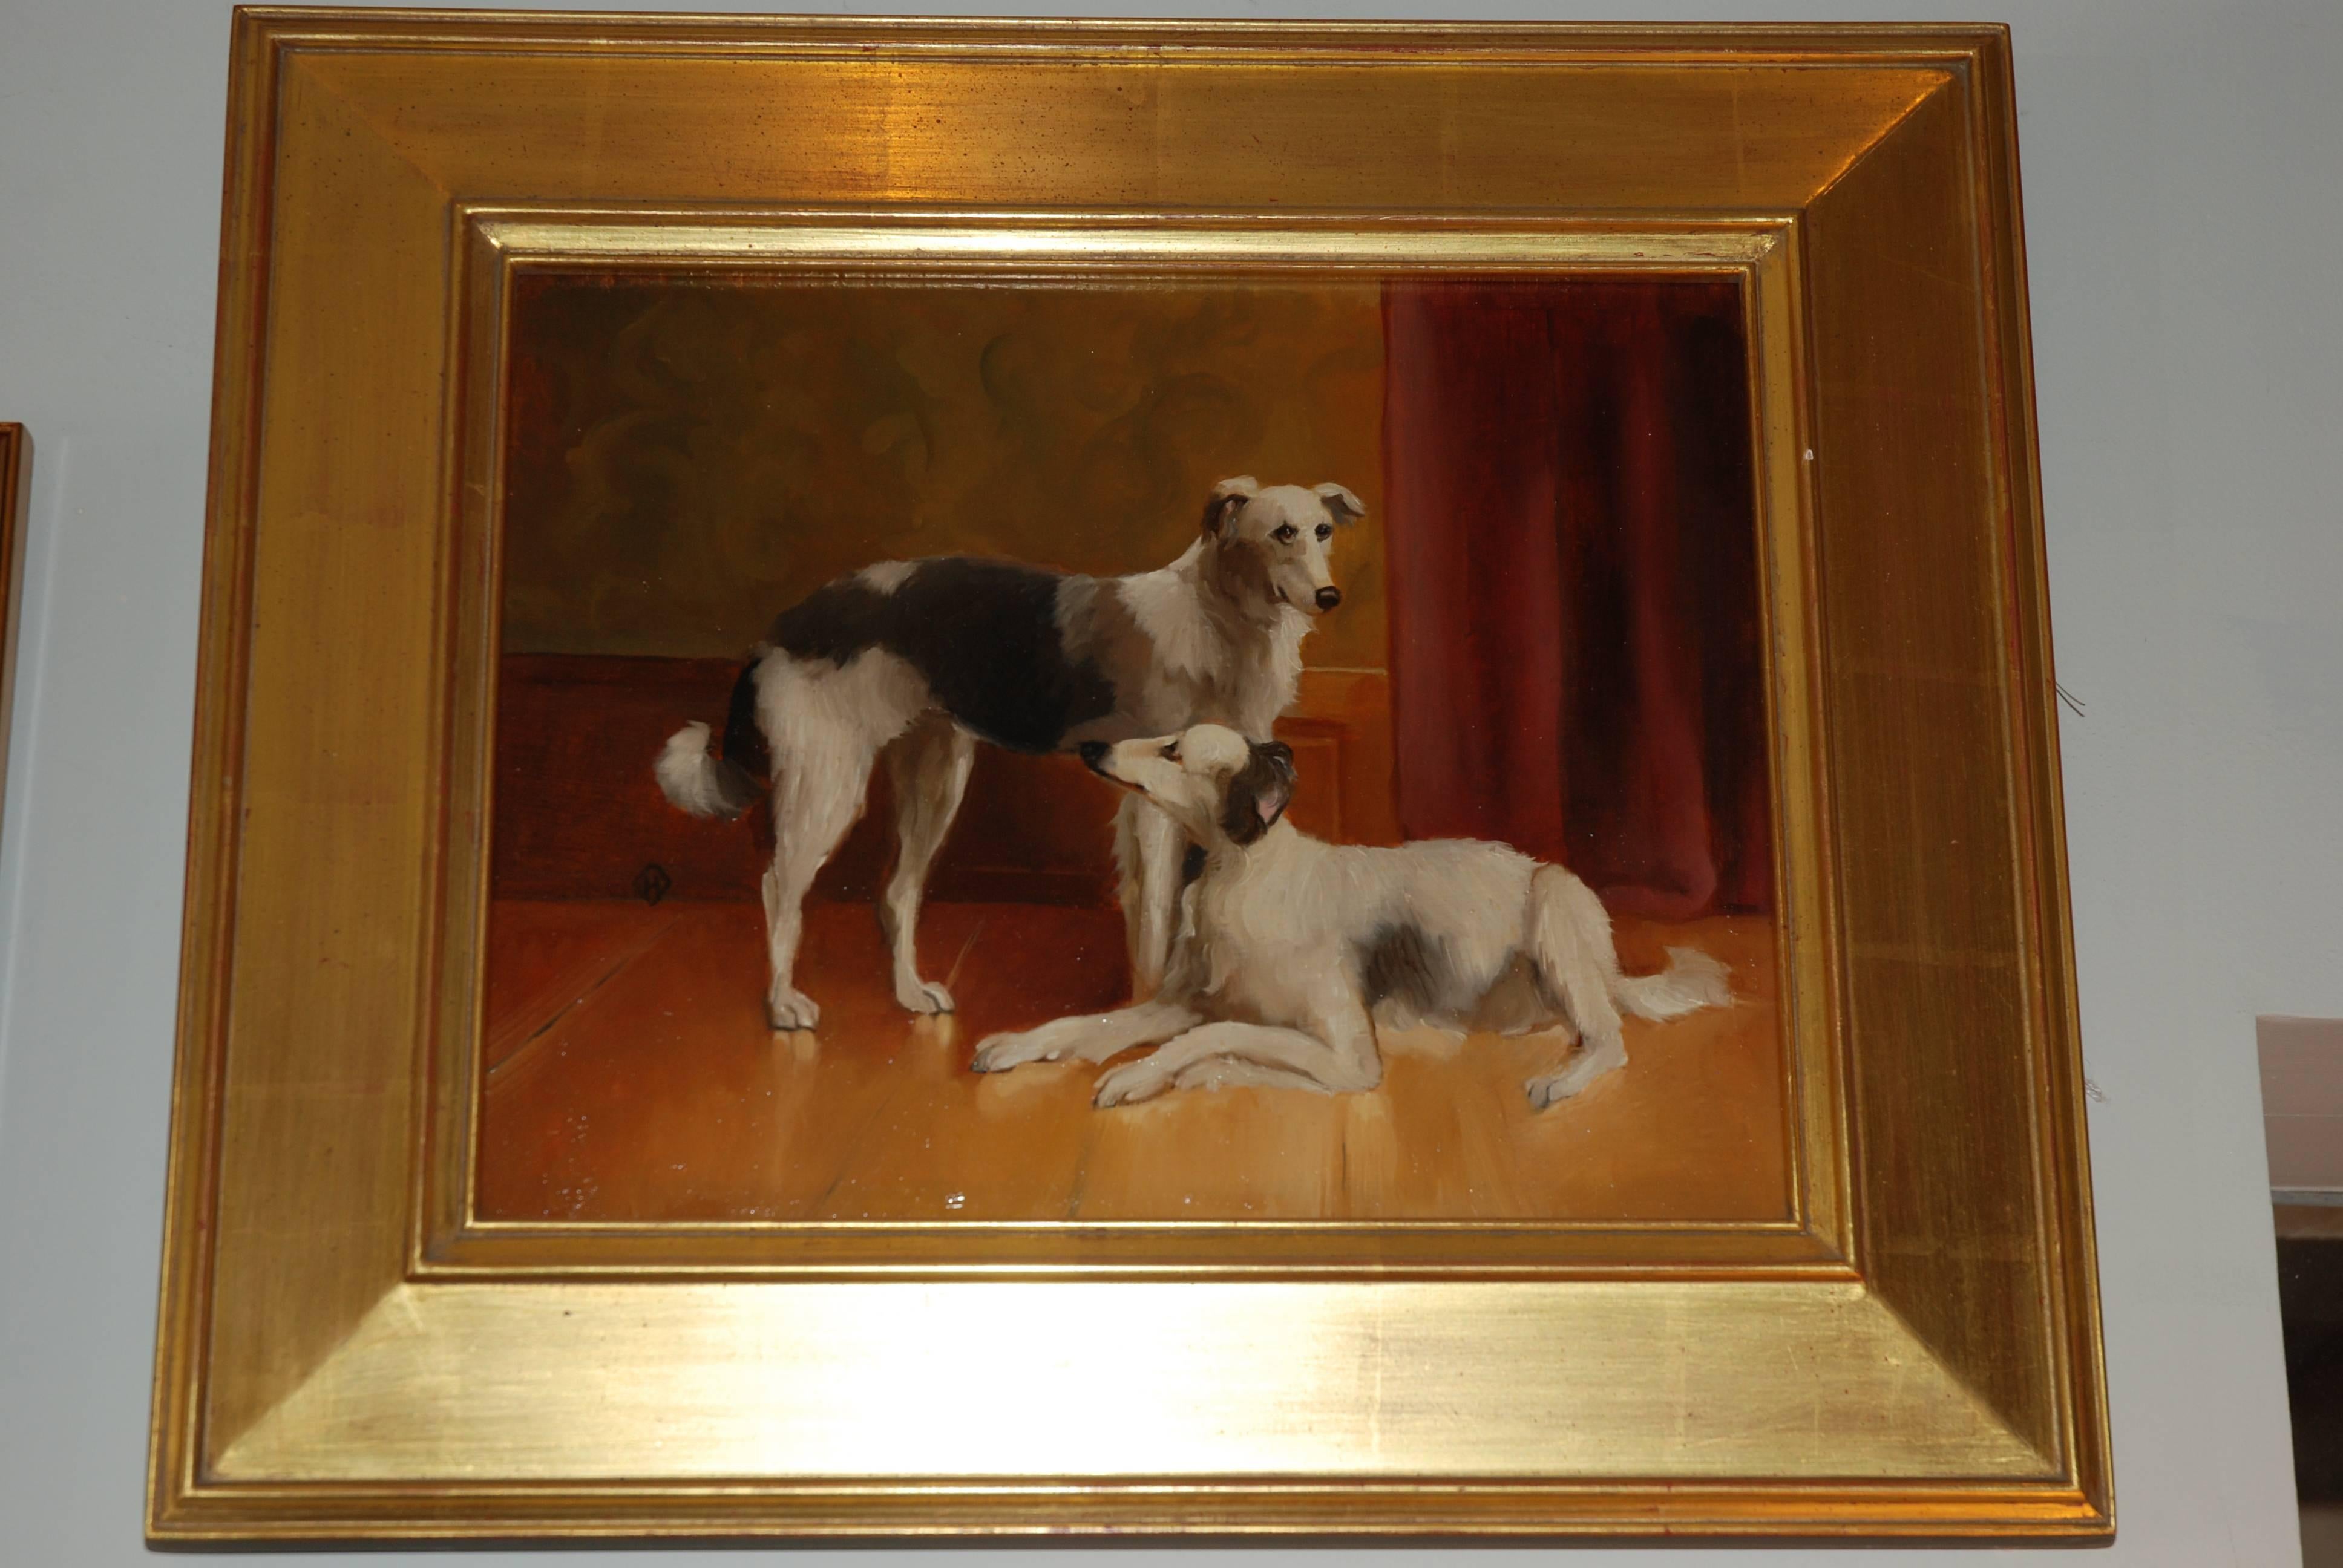 Oil Painting of a pair of Borzoi Dogs after Carl Reichert
Oil on board
Gold leaf frame